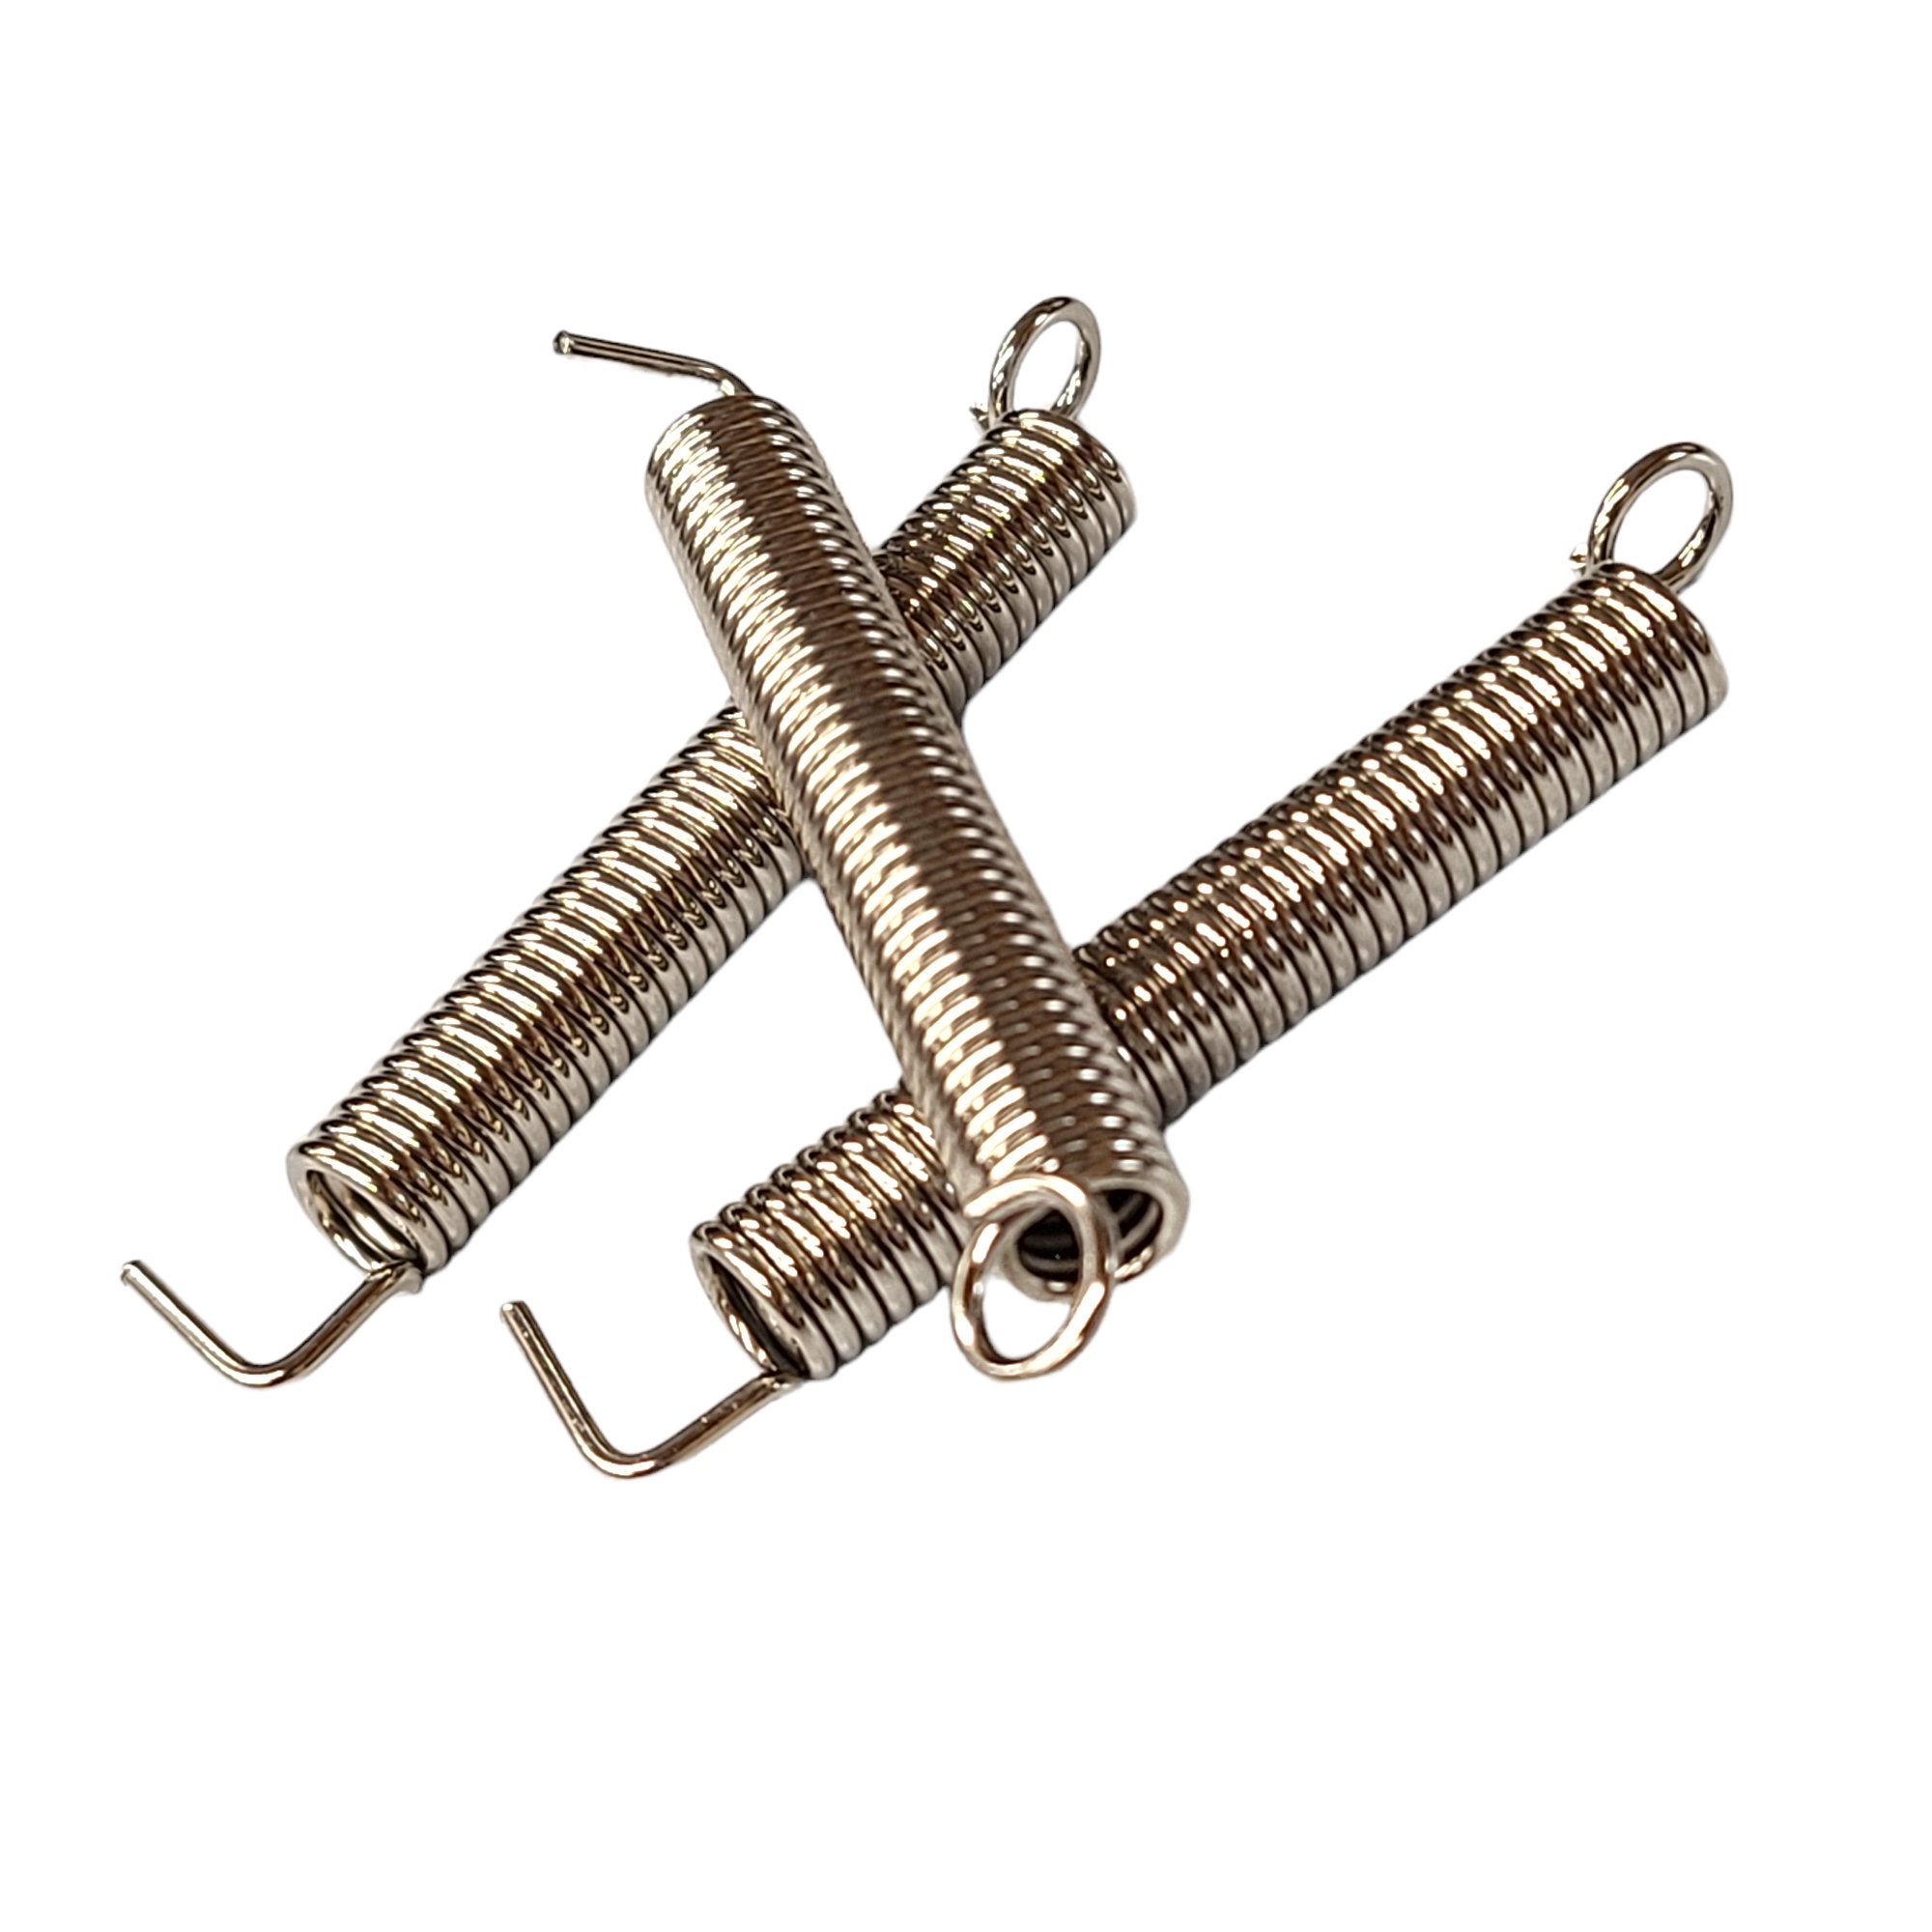 WD Music Standard Tension Springs for Stratocaster Tremolo, Set of 3